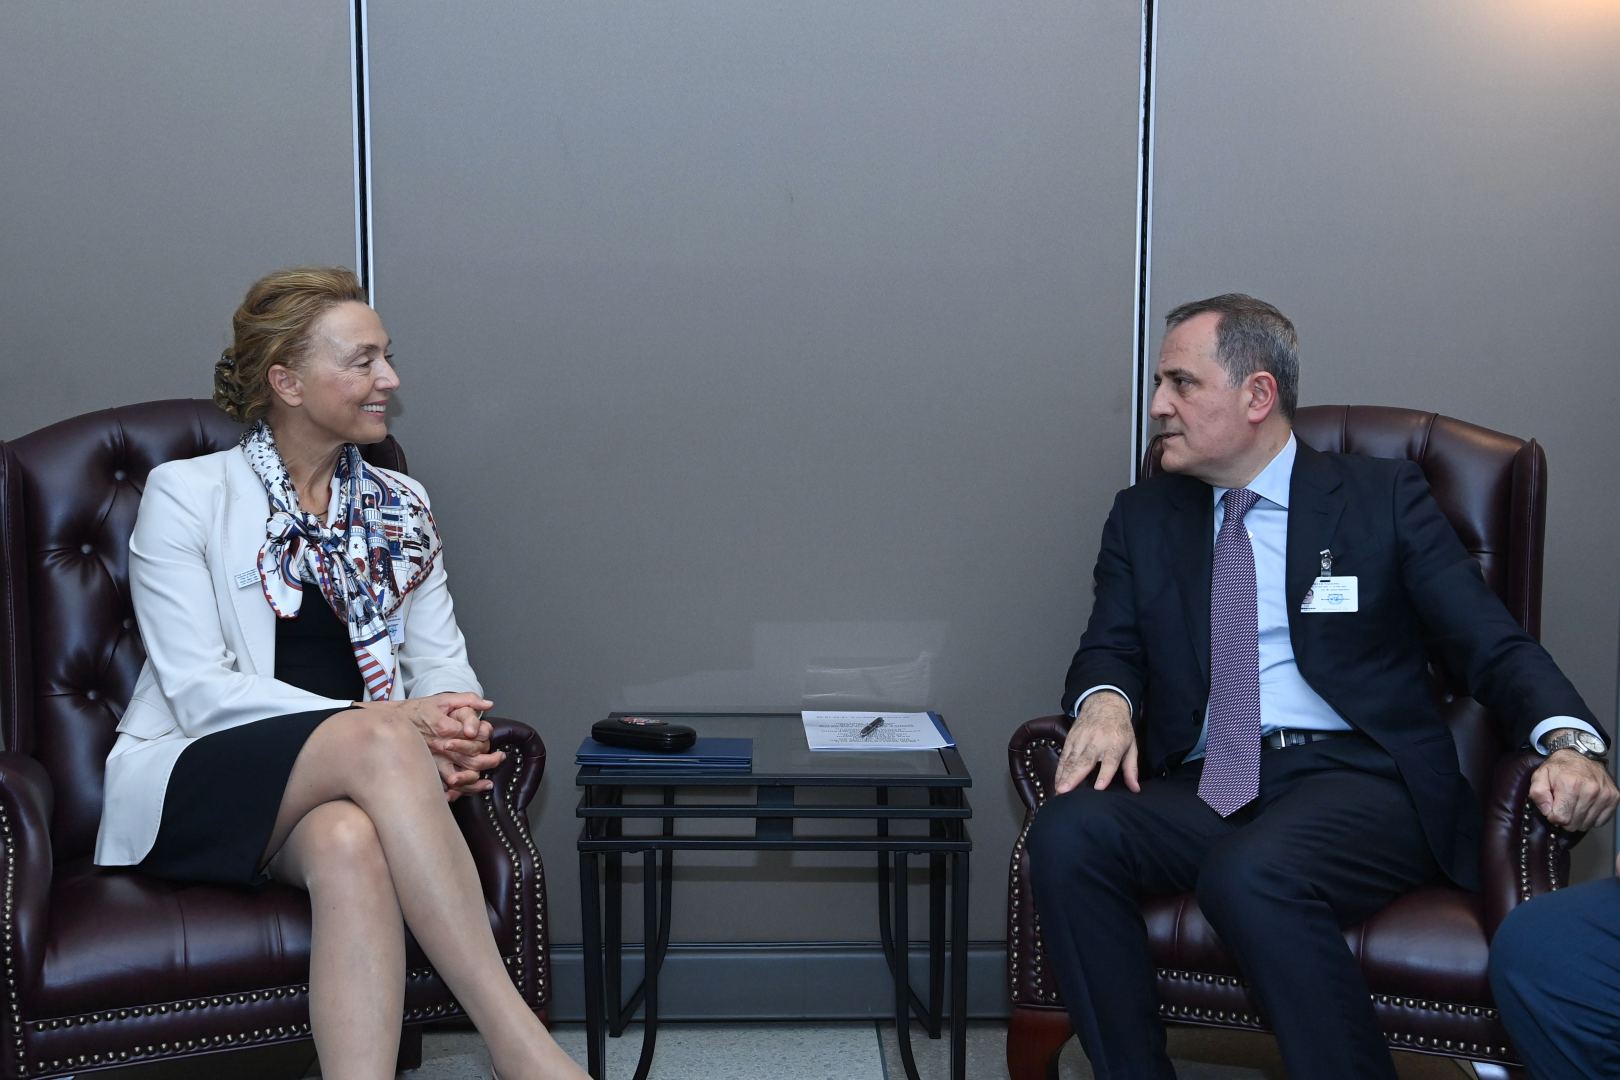 Azerbaijani FM meets with Secretary General of Council of Europe (PHOTO)